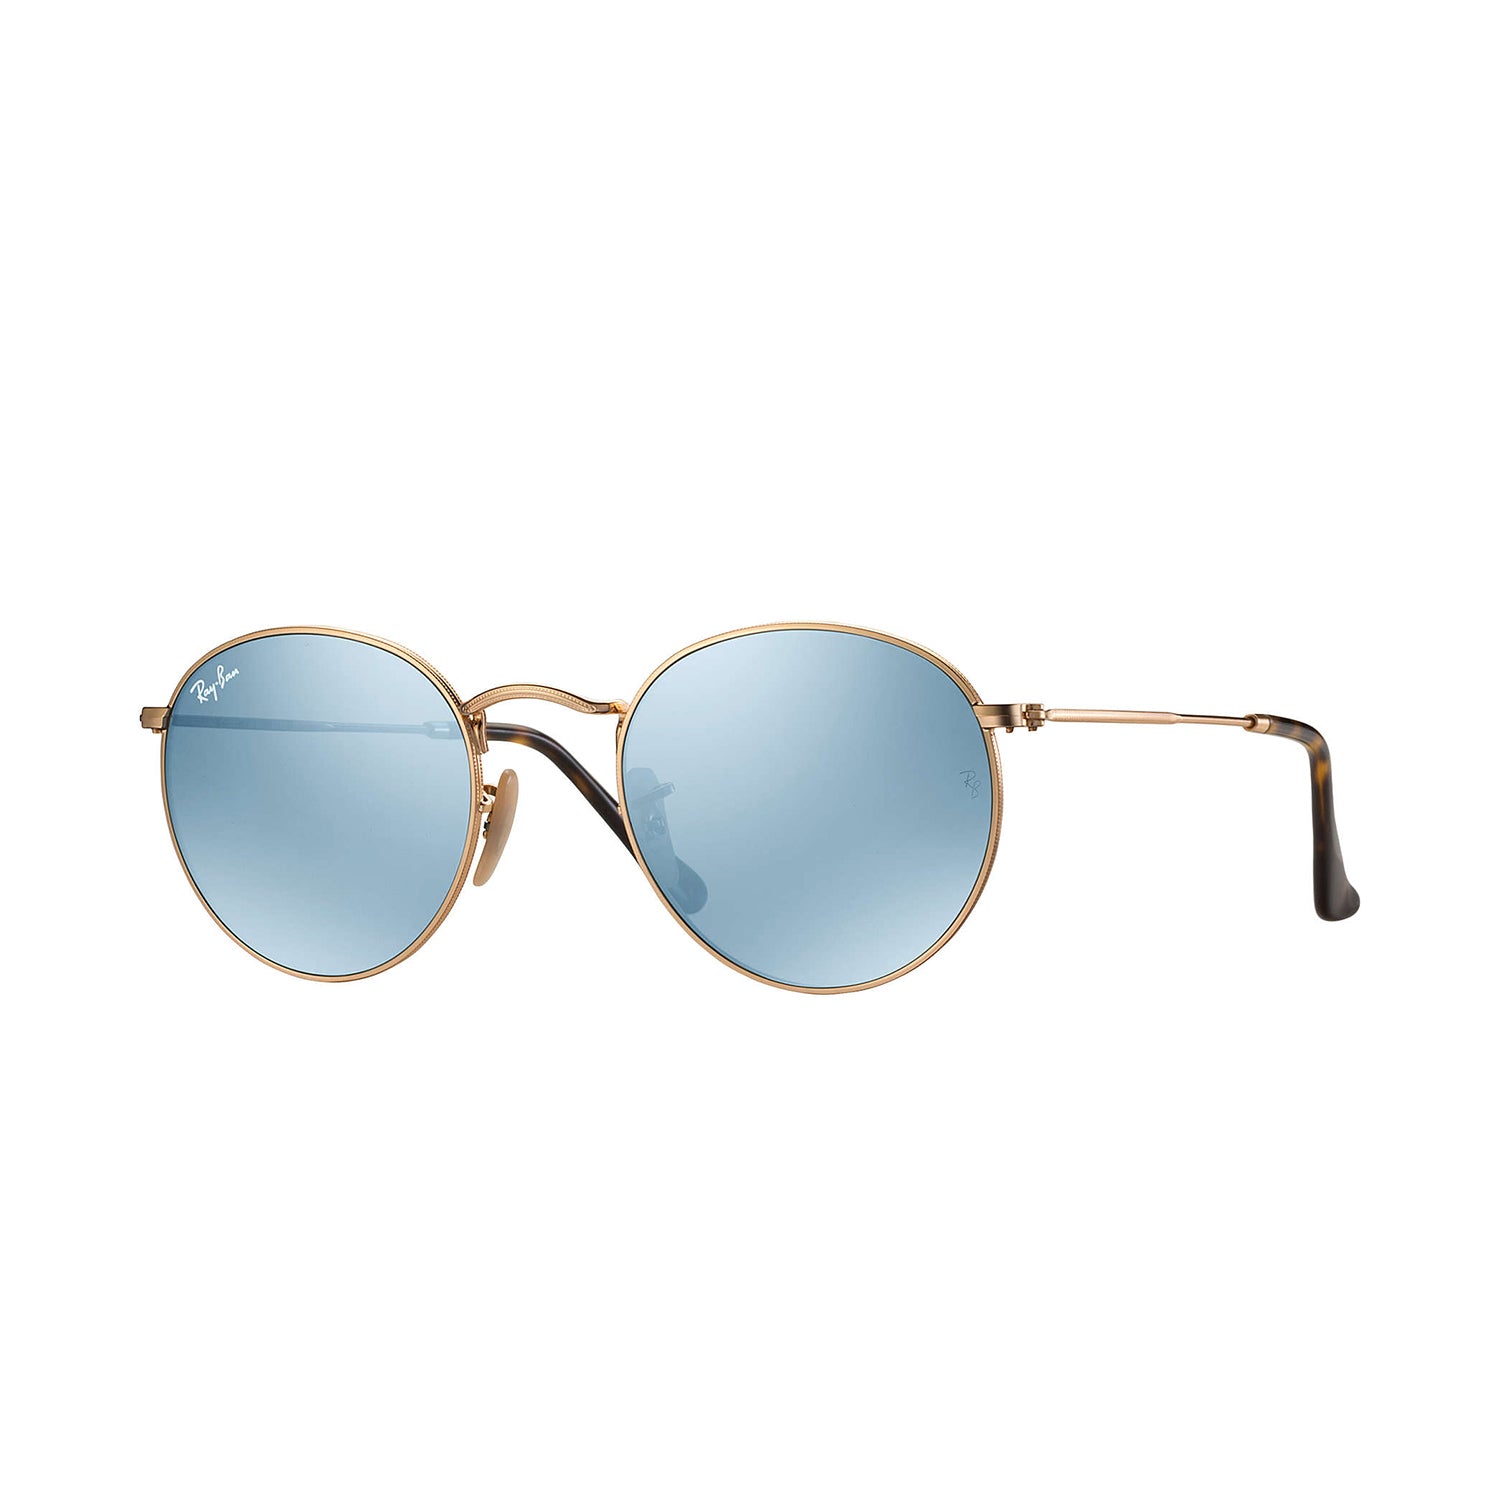 Ray Ban Round Flat Lenses - Gold Frame - Silver Flash Lens | Altitude Sports